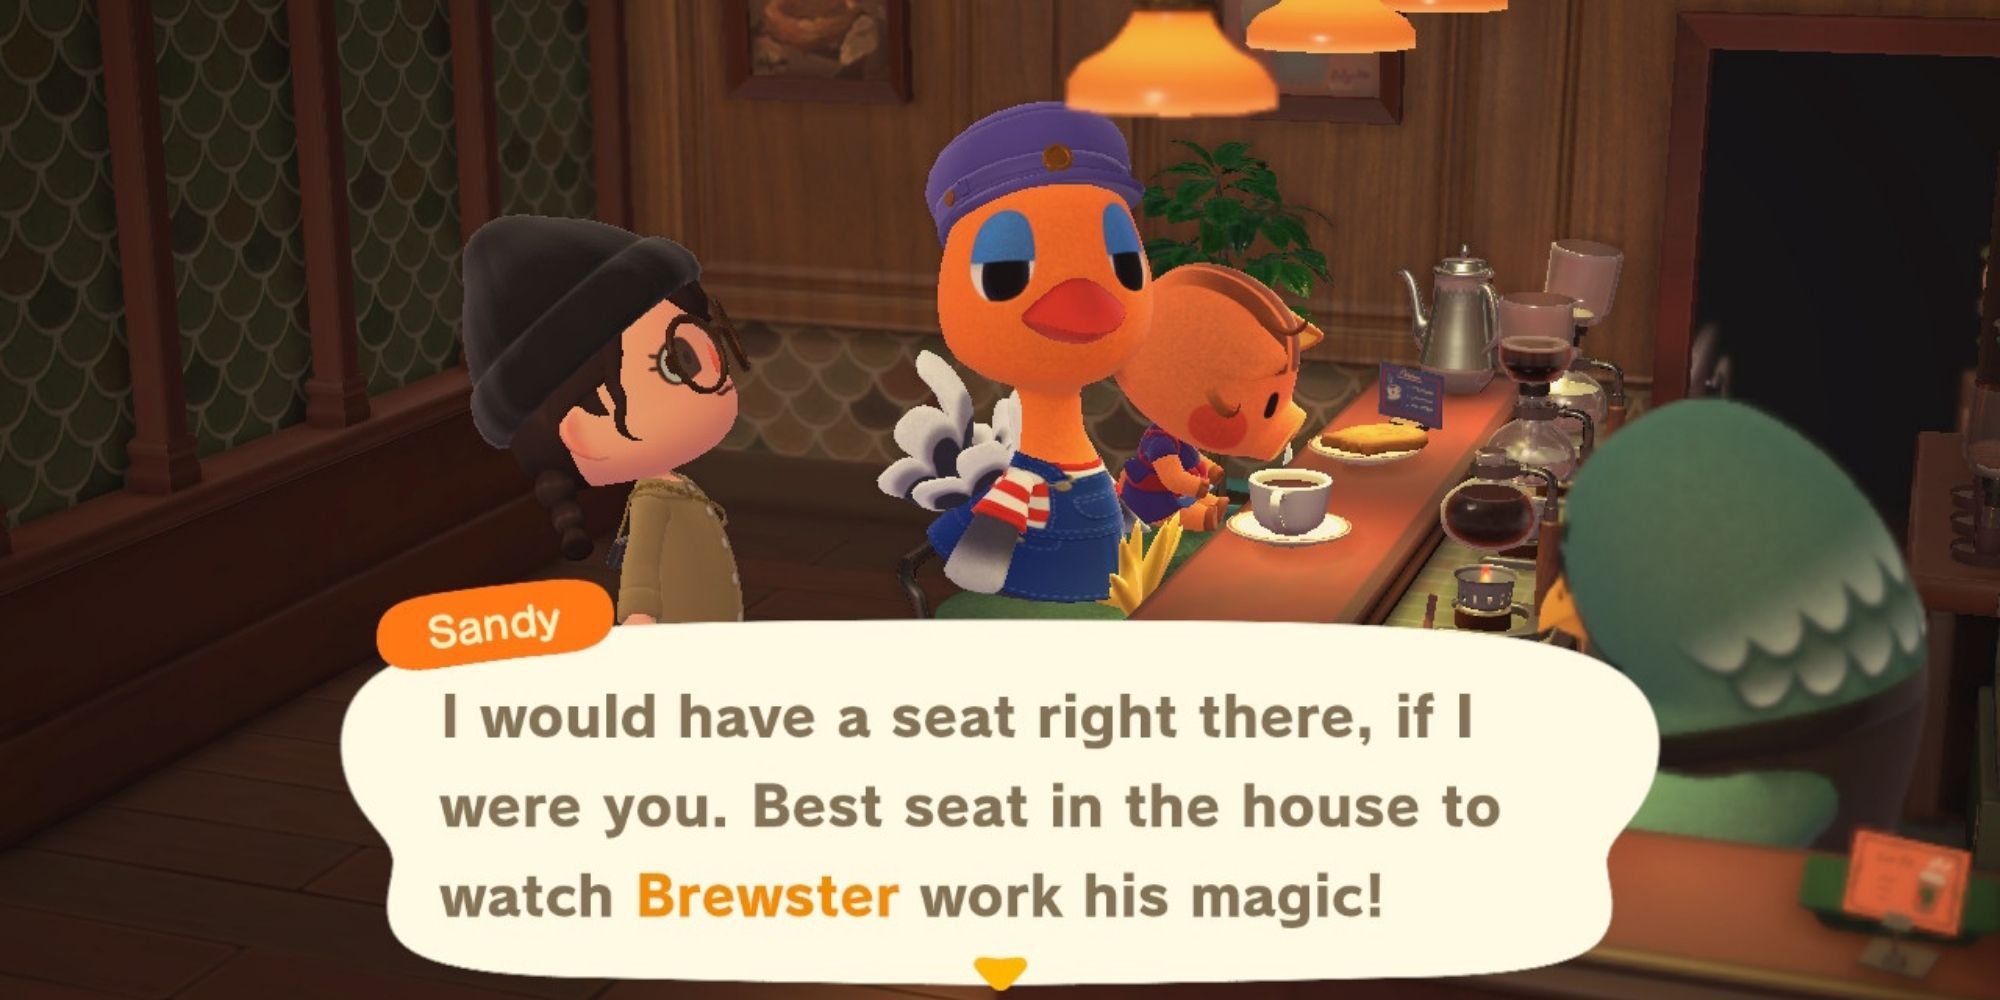 Old Animal Crossing Villagers Will Recognize You In The Roost